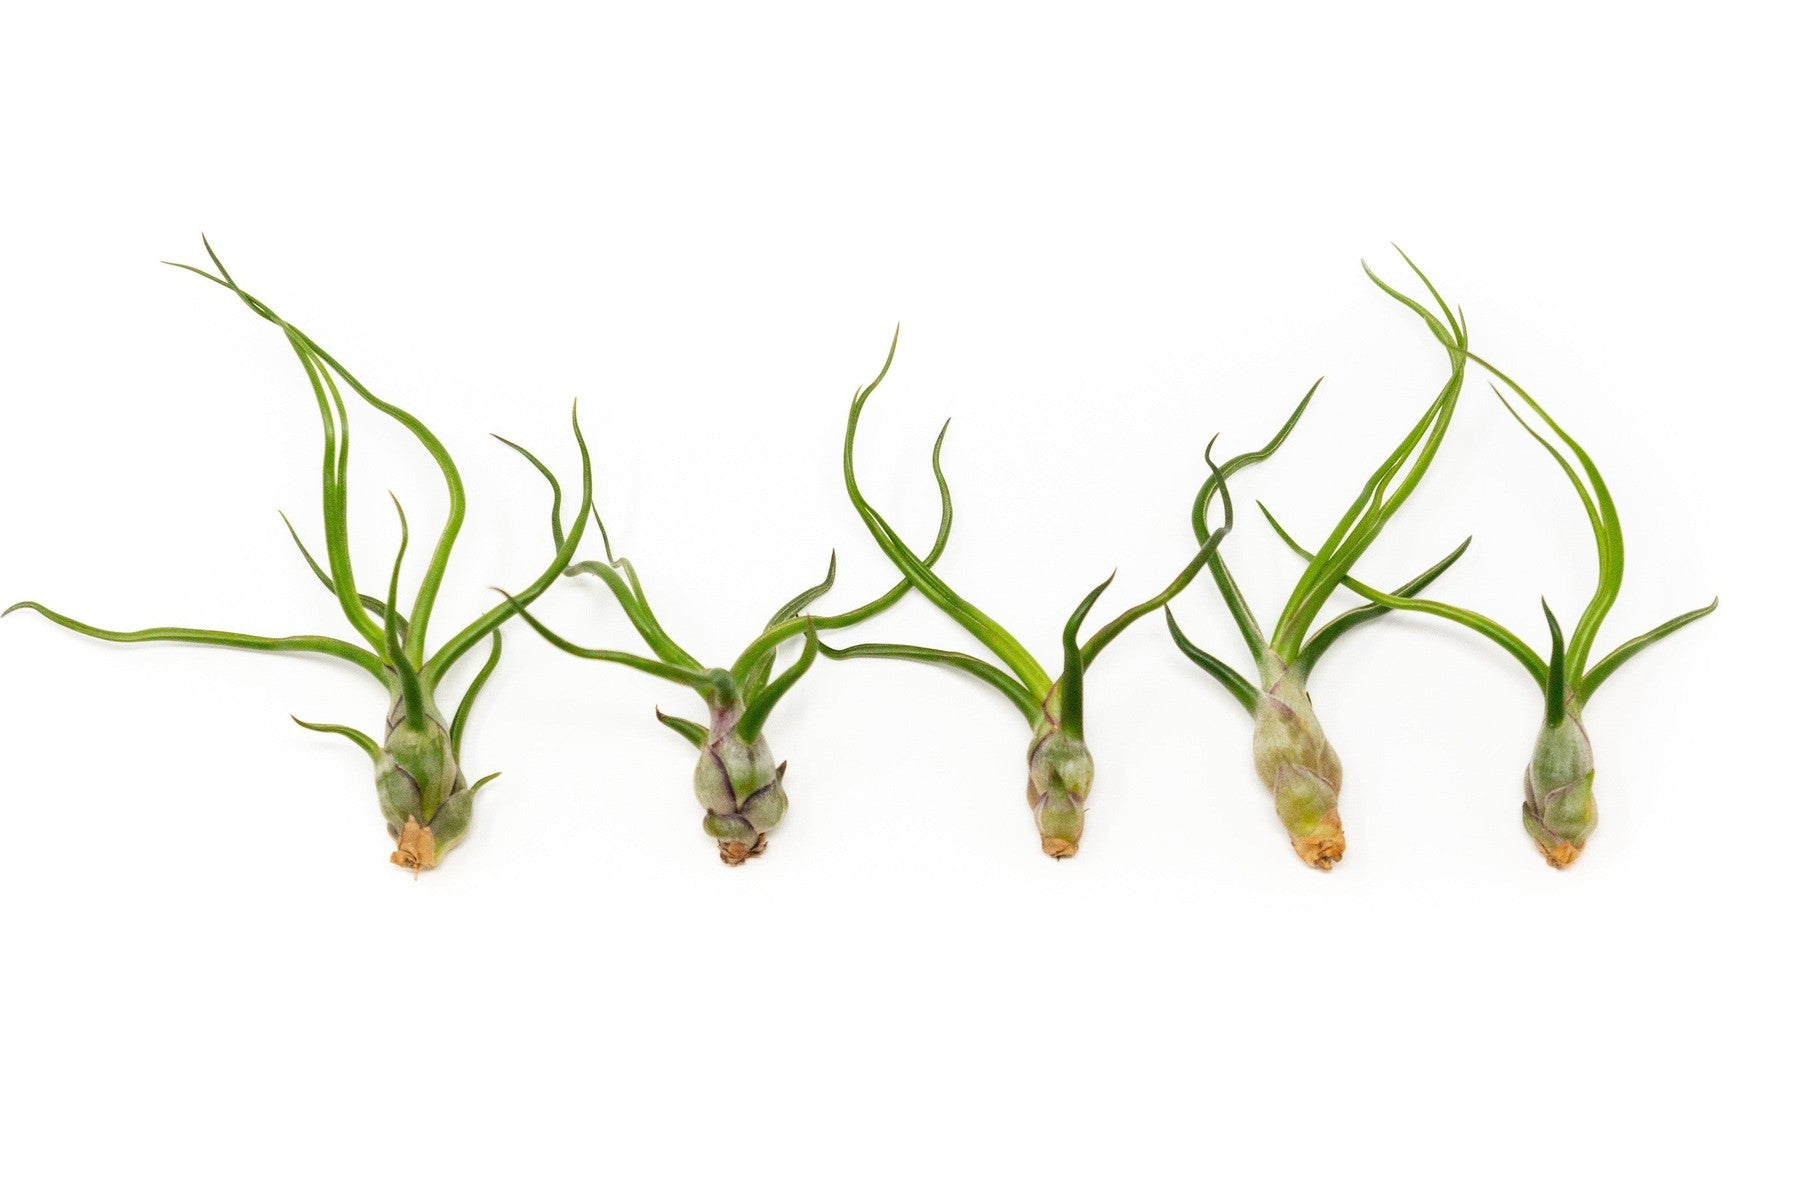 SALE - Tillandsia Bulbosa Guatemala Air Plants - Set of 10, 20, or 30 - 40% Off-airplant-The Succulent Source